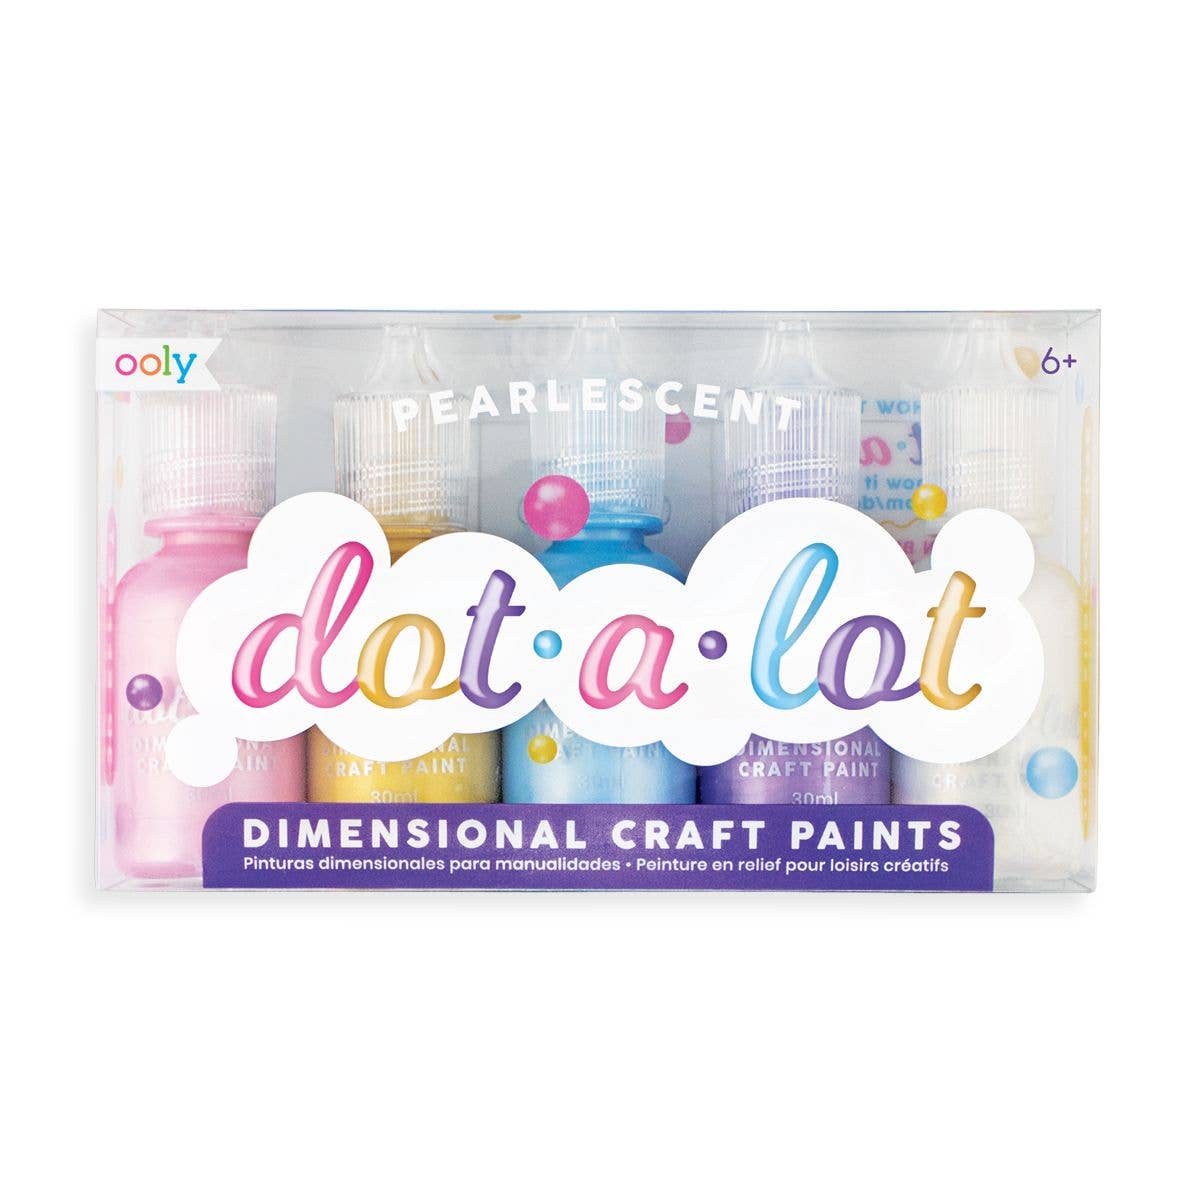 Dot-A-Lot Craft Paint - Pearlescent